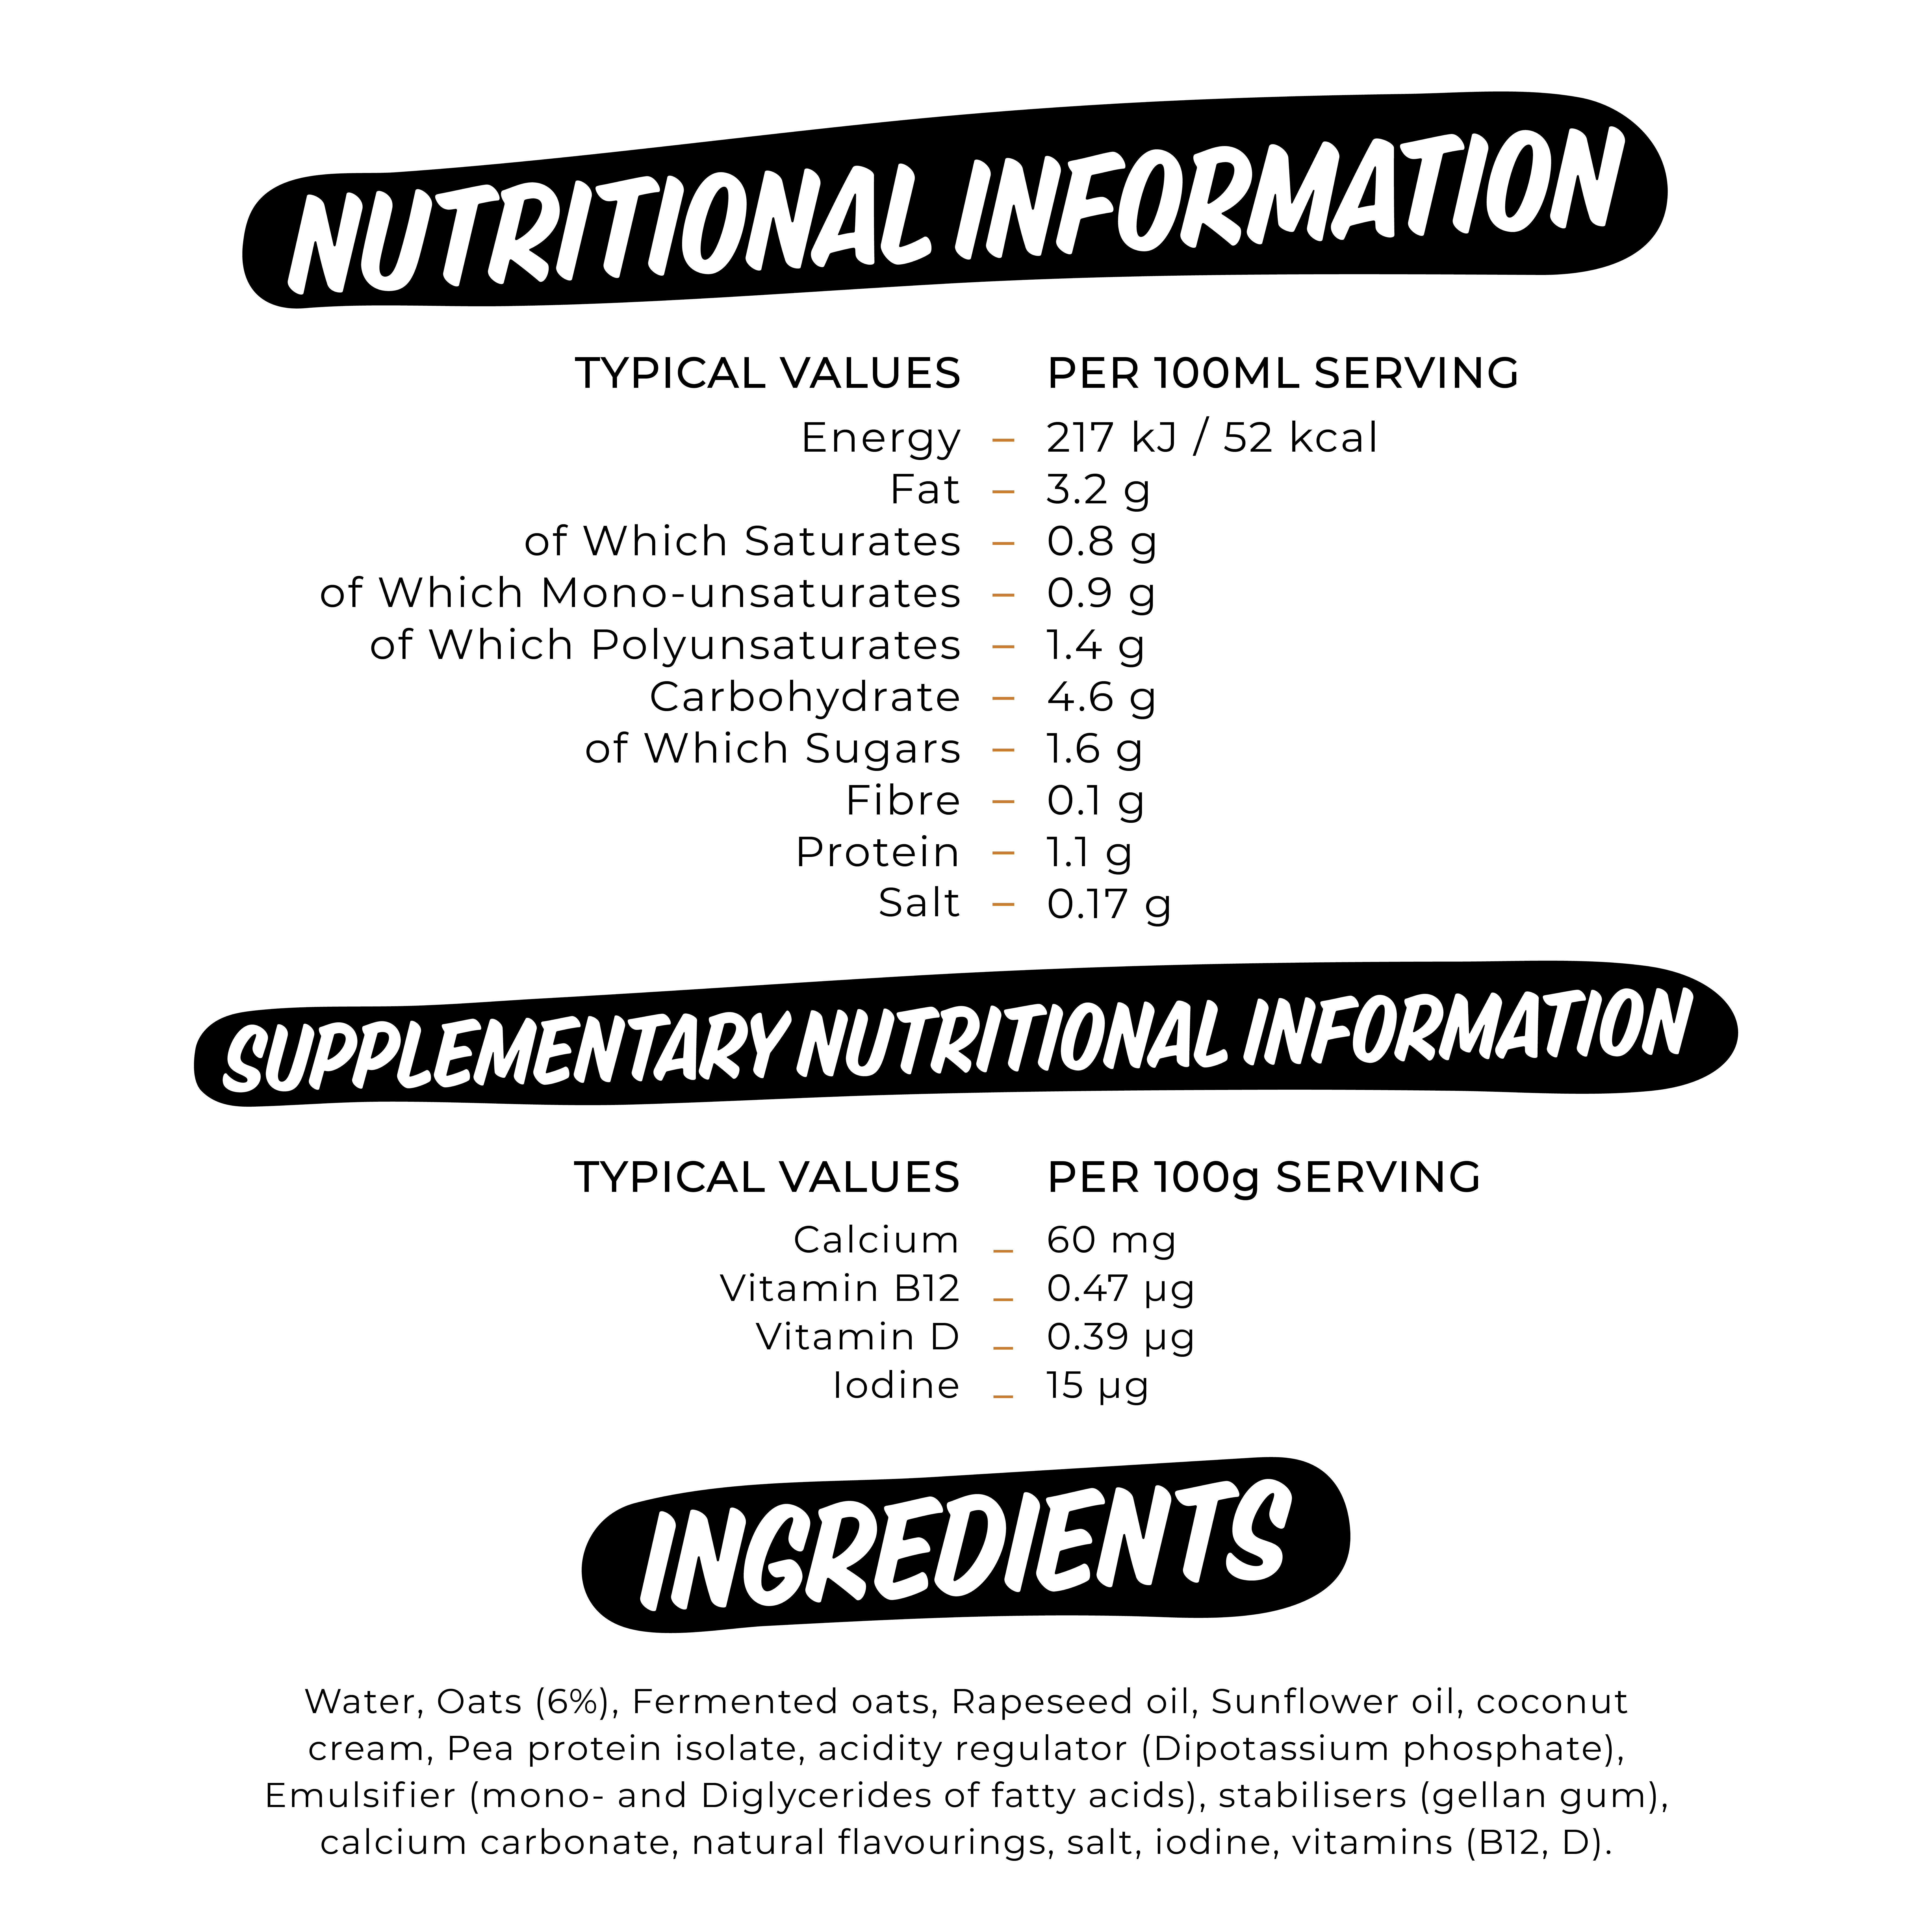 
                                  TYPICAL VALUES PER 100ML SERVING Energy 217 kJ / 52 kcal Fat 3.2 g of Which Saturates 0.8 g of Which Mono-unsaturates 0.9 g of Which Polyunsaturates 1.4 g Carbohydrate 4.6 g of Which Sugars 1.6 g Fibre 0.1 g Protein 1.1 g Salt 0.17 g 
                                  SUPPLEMENTARY NUTRITIONAL INFORMATION 
                                  TYPICAL VALUES PER 100g SERVING Calcium 60 mg Vitamin B12 0.47 pg Vitamin D 0.39 pg Iodine 15 pg 

                                  Water, Oats (6%), Fermented oats, Rapeseed oil, Sunflower oil, coconut cream, Pea protein isolate, acidity regulator (Dipotassium phosphate), Emulsifier (mono- and Diglycerides of fatty acids), stabilisers (gellan gum), calcium carbonate, natural flavourings, salt, iodine, vitamins (B12, D).  
                                  